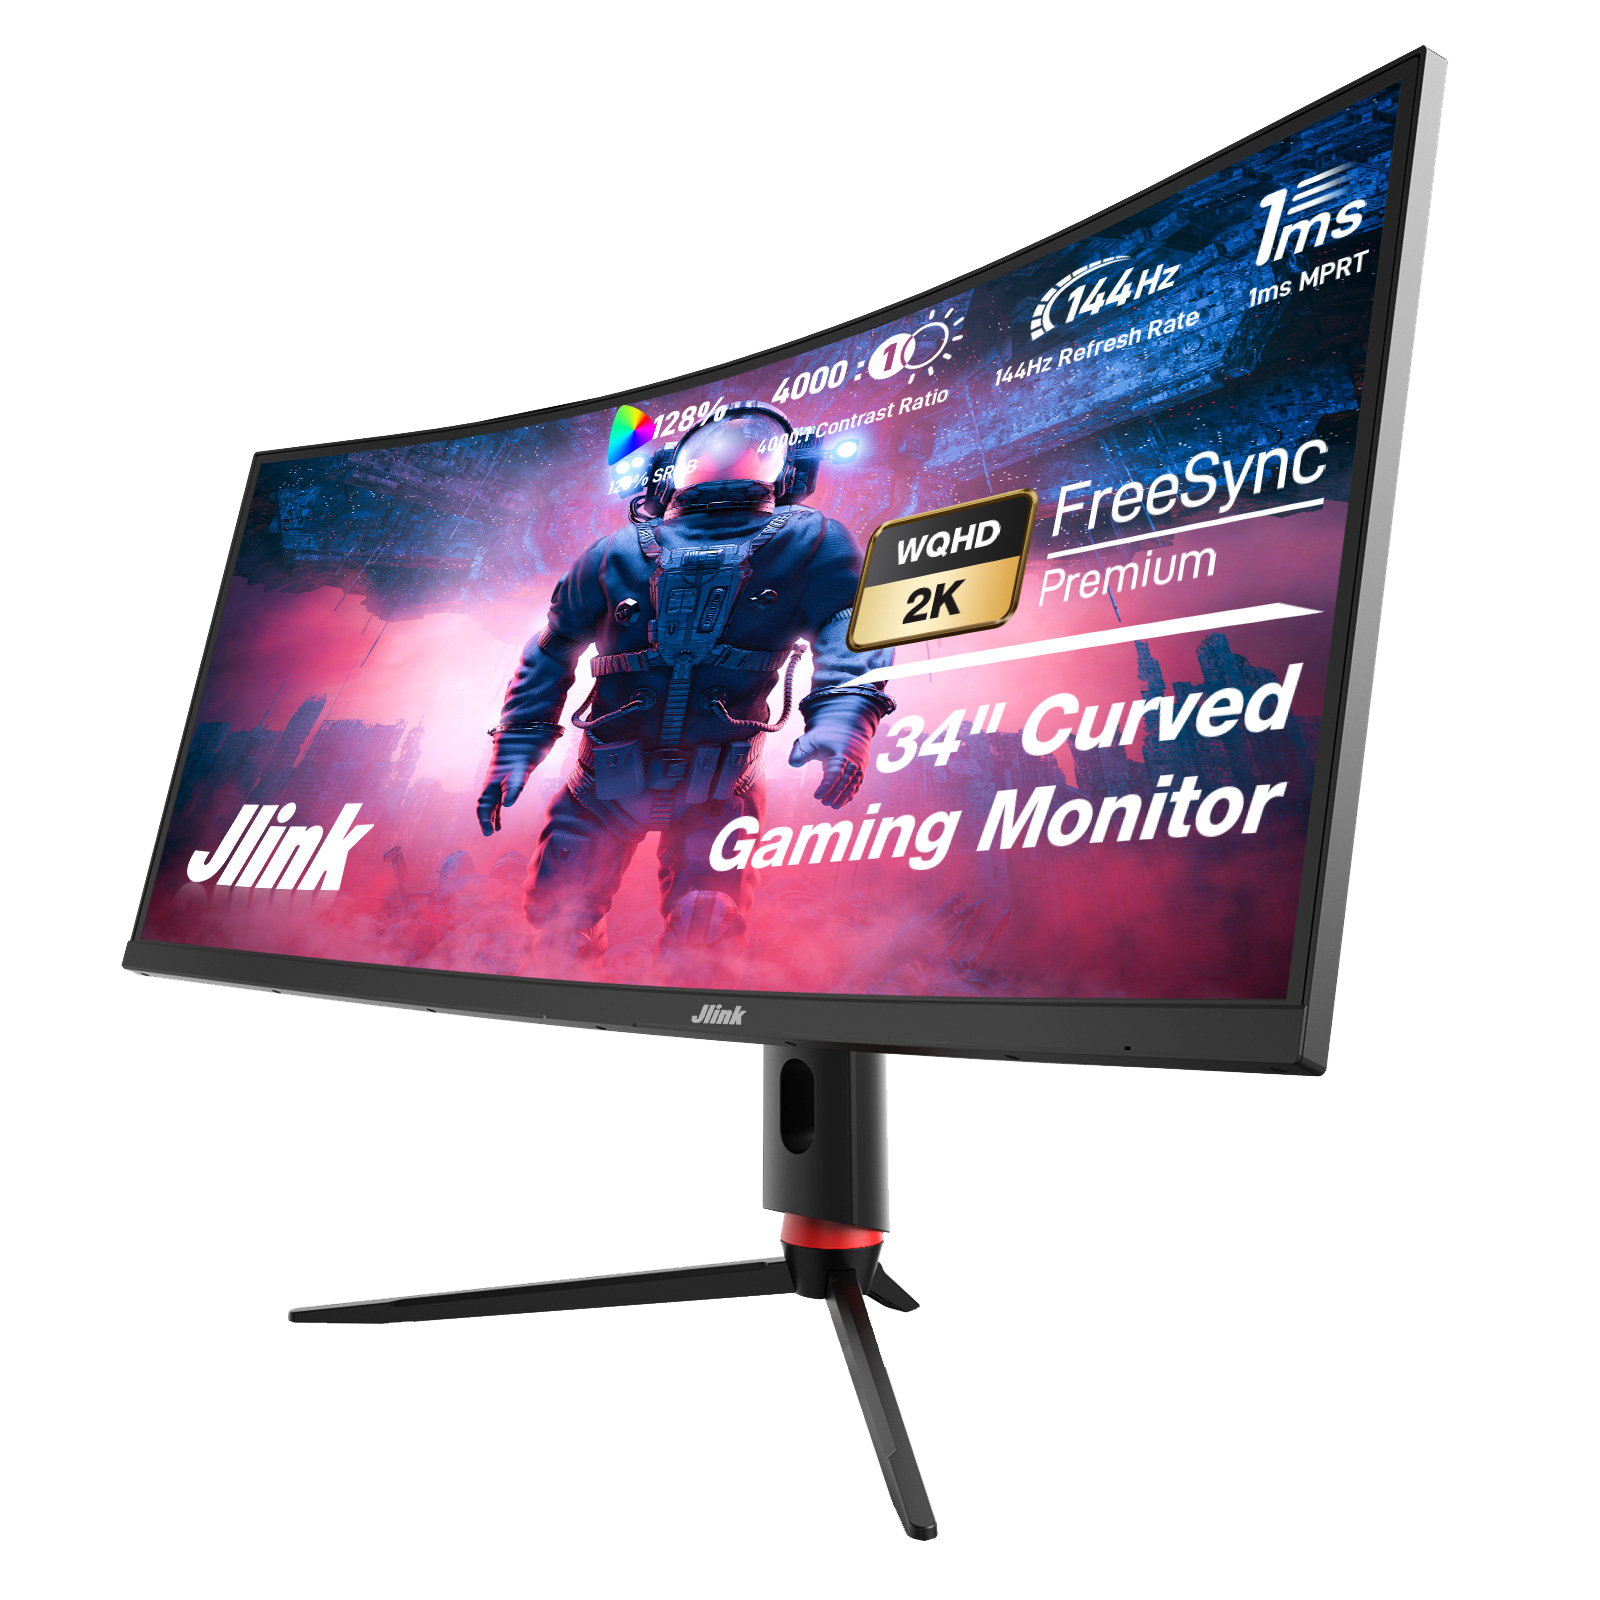 34" curved gaming monitor jlink